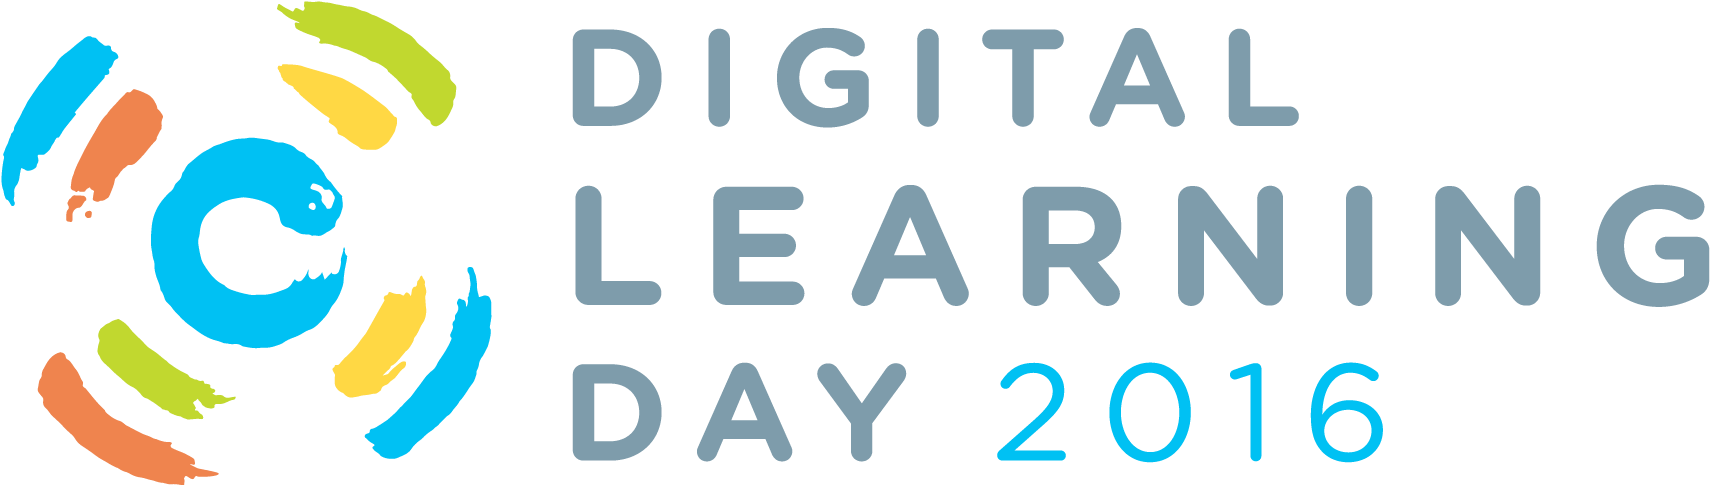 Digital Learning Day 2016 Banner - Digital Learning Day 2016 (1920x621)